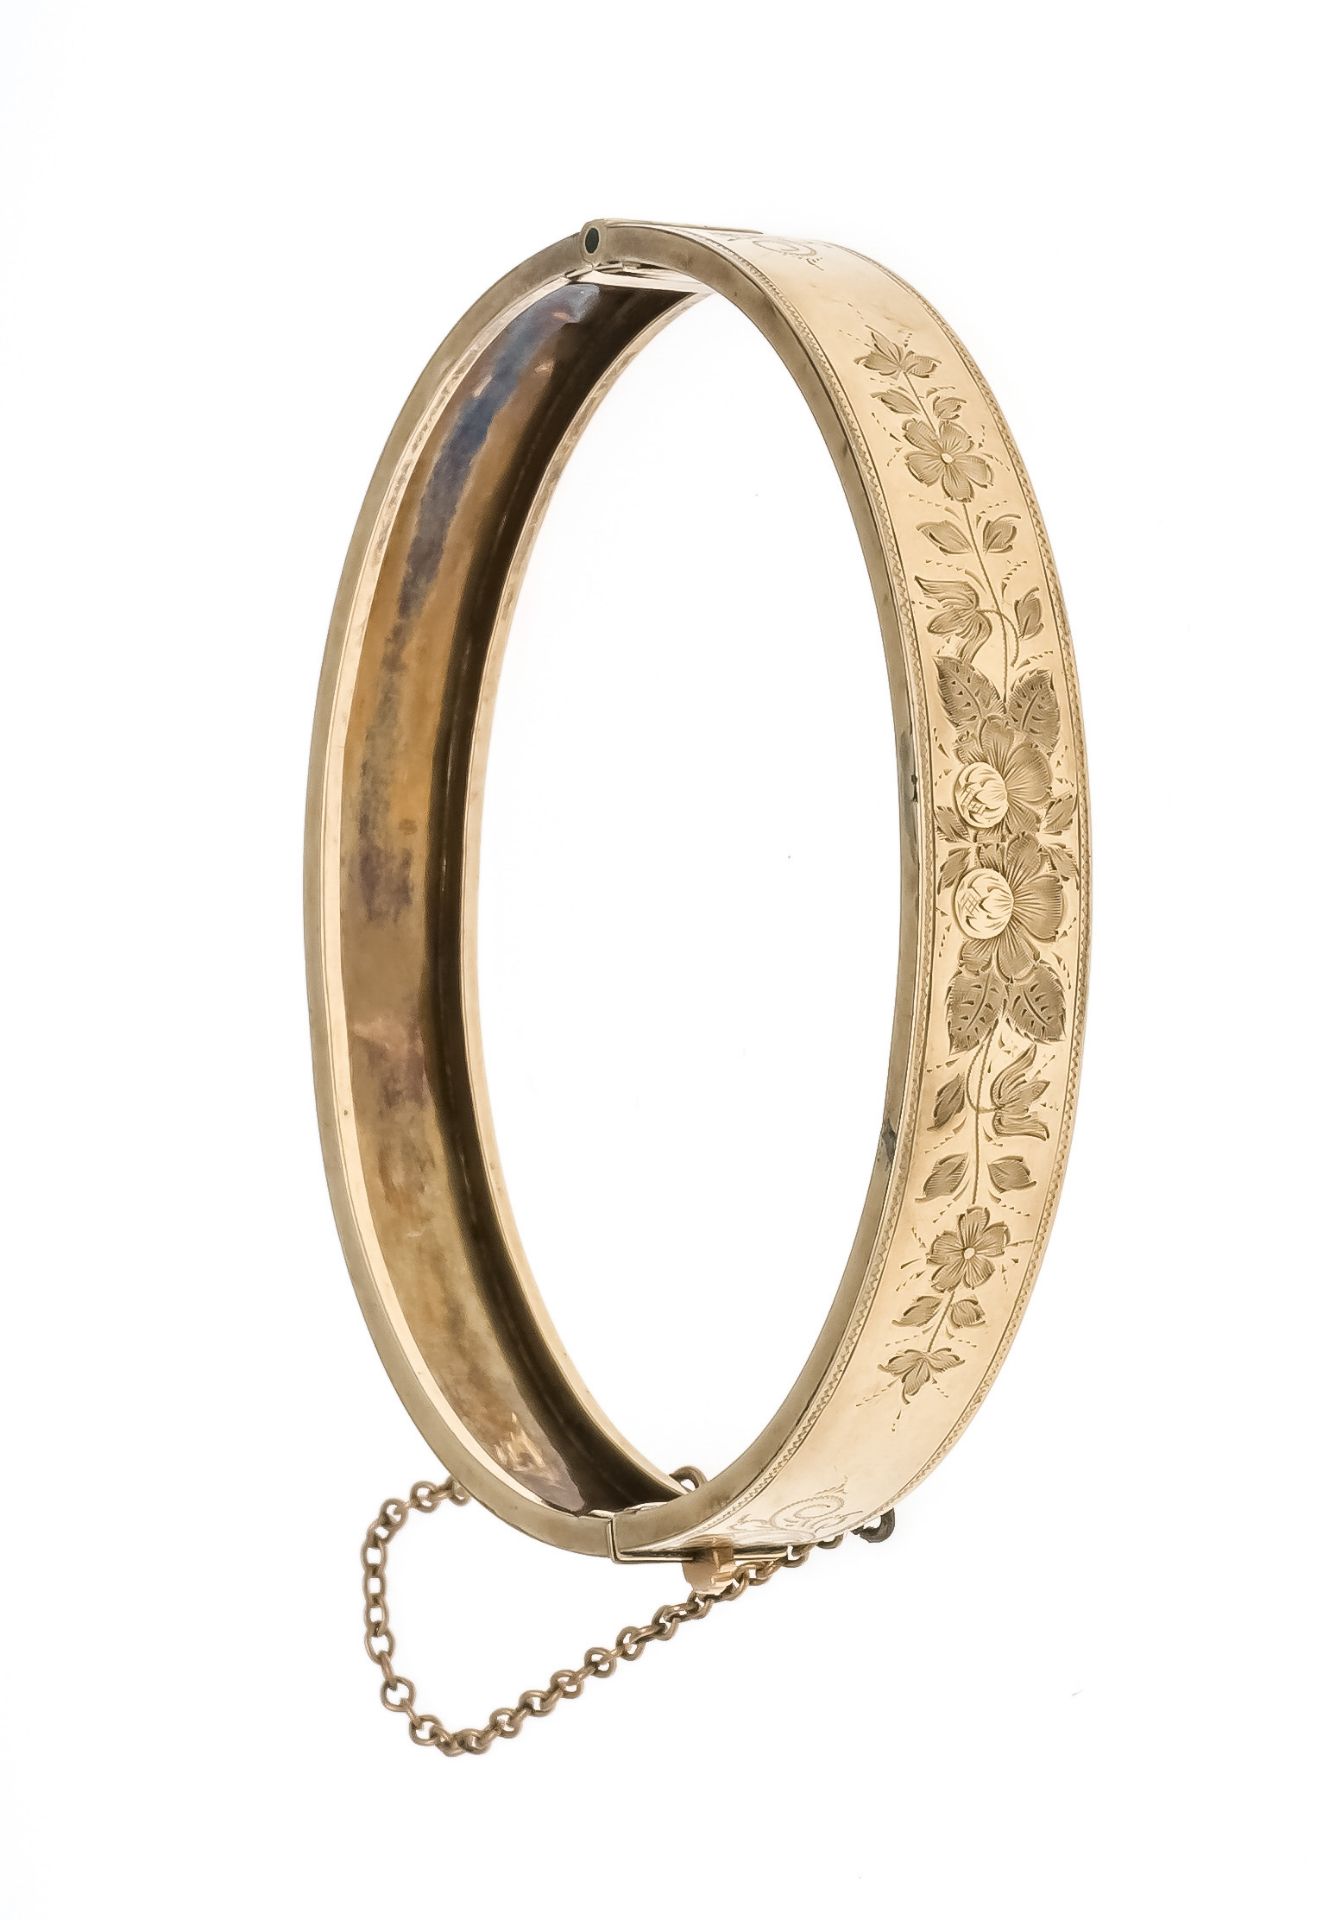 A hinged bangle, circa 1880 RG 585/000 unmarked, tested, the front with fine floral chasing, w. 9.